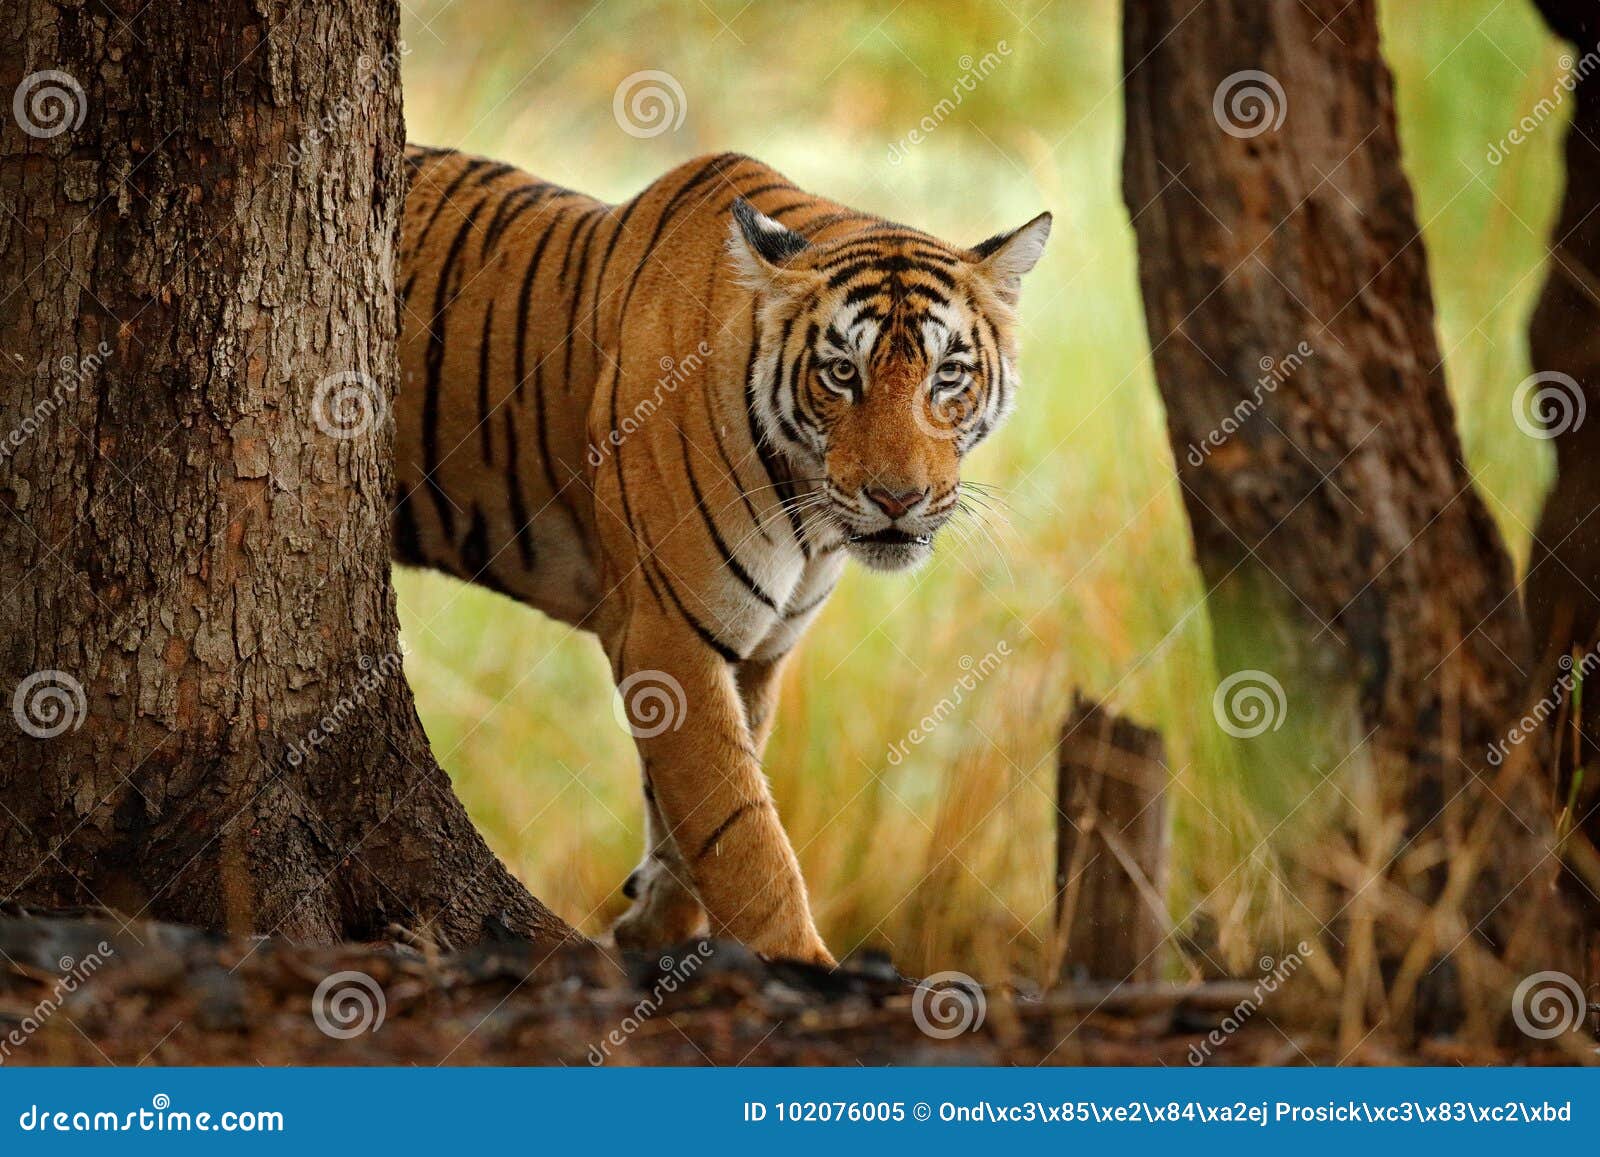 Tiger Walking in Old Dry Forest. Indian Tiger with First Rain, Wild Danger  Animal in the Nature Habitat, Ranthambore, India. Big C Stock Image - Image  of beautiful, habitat: 102076005